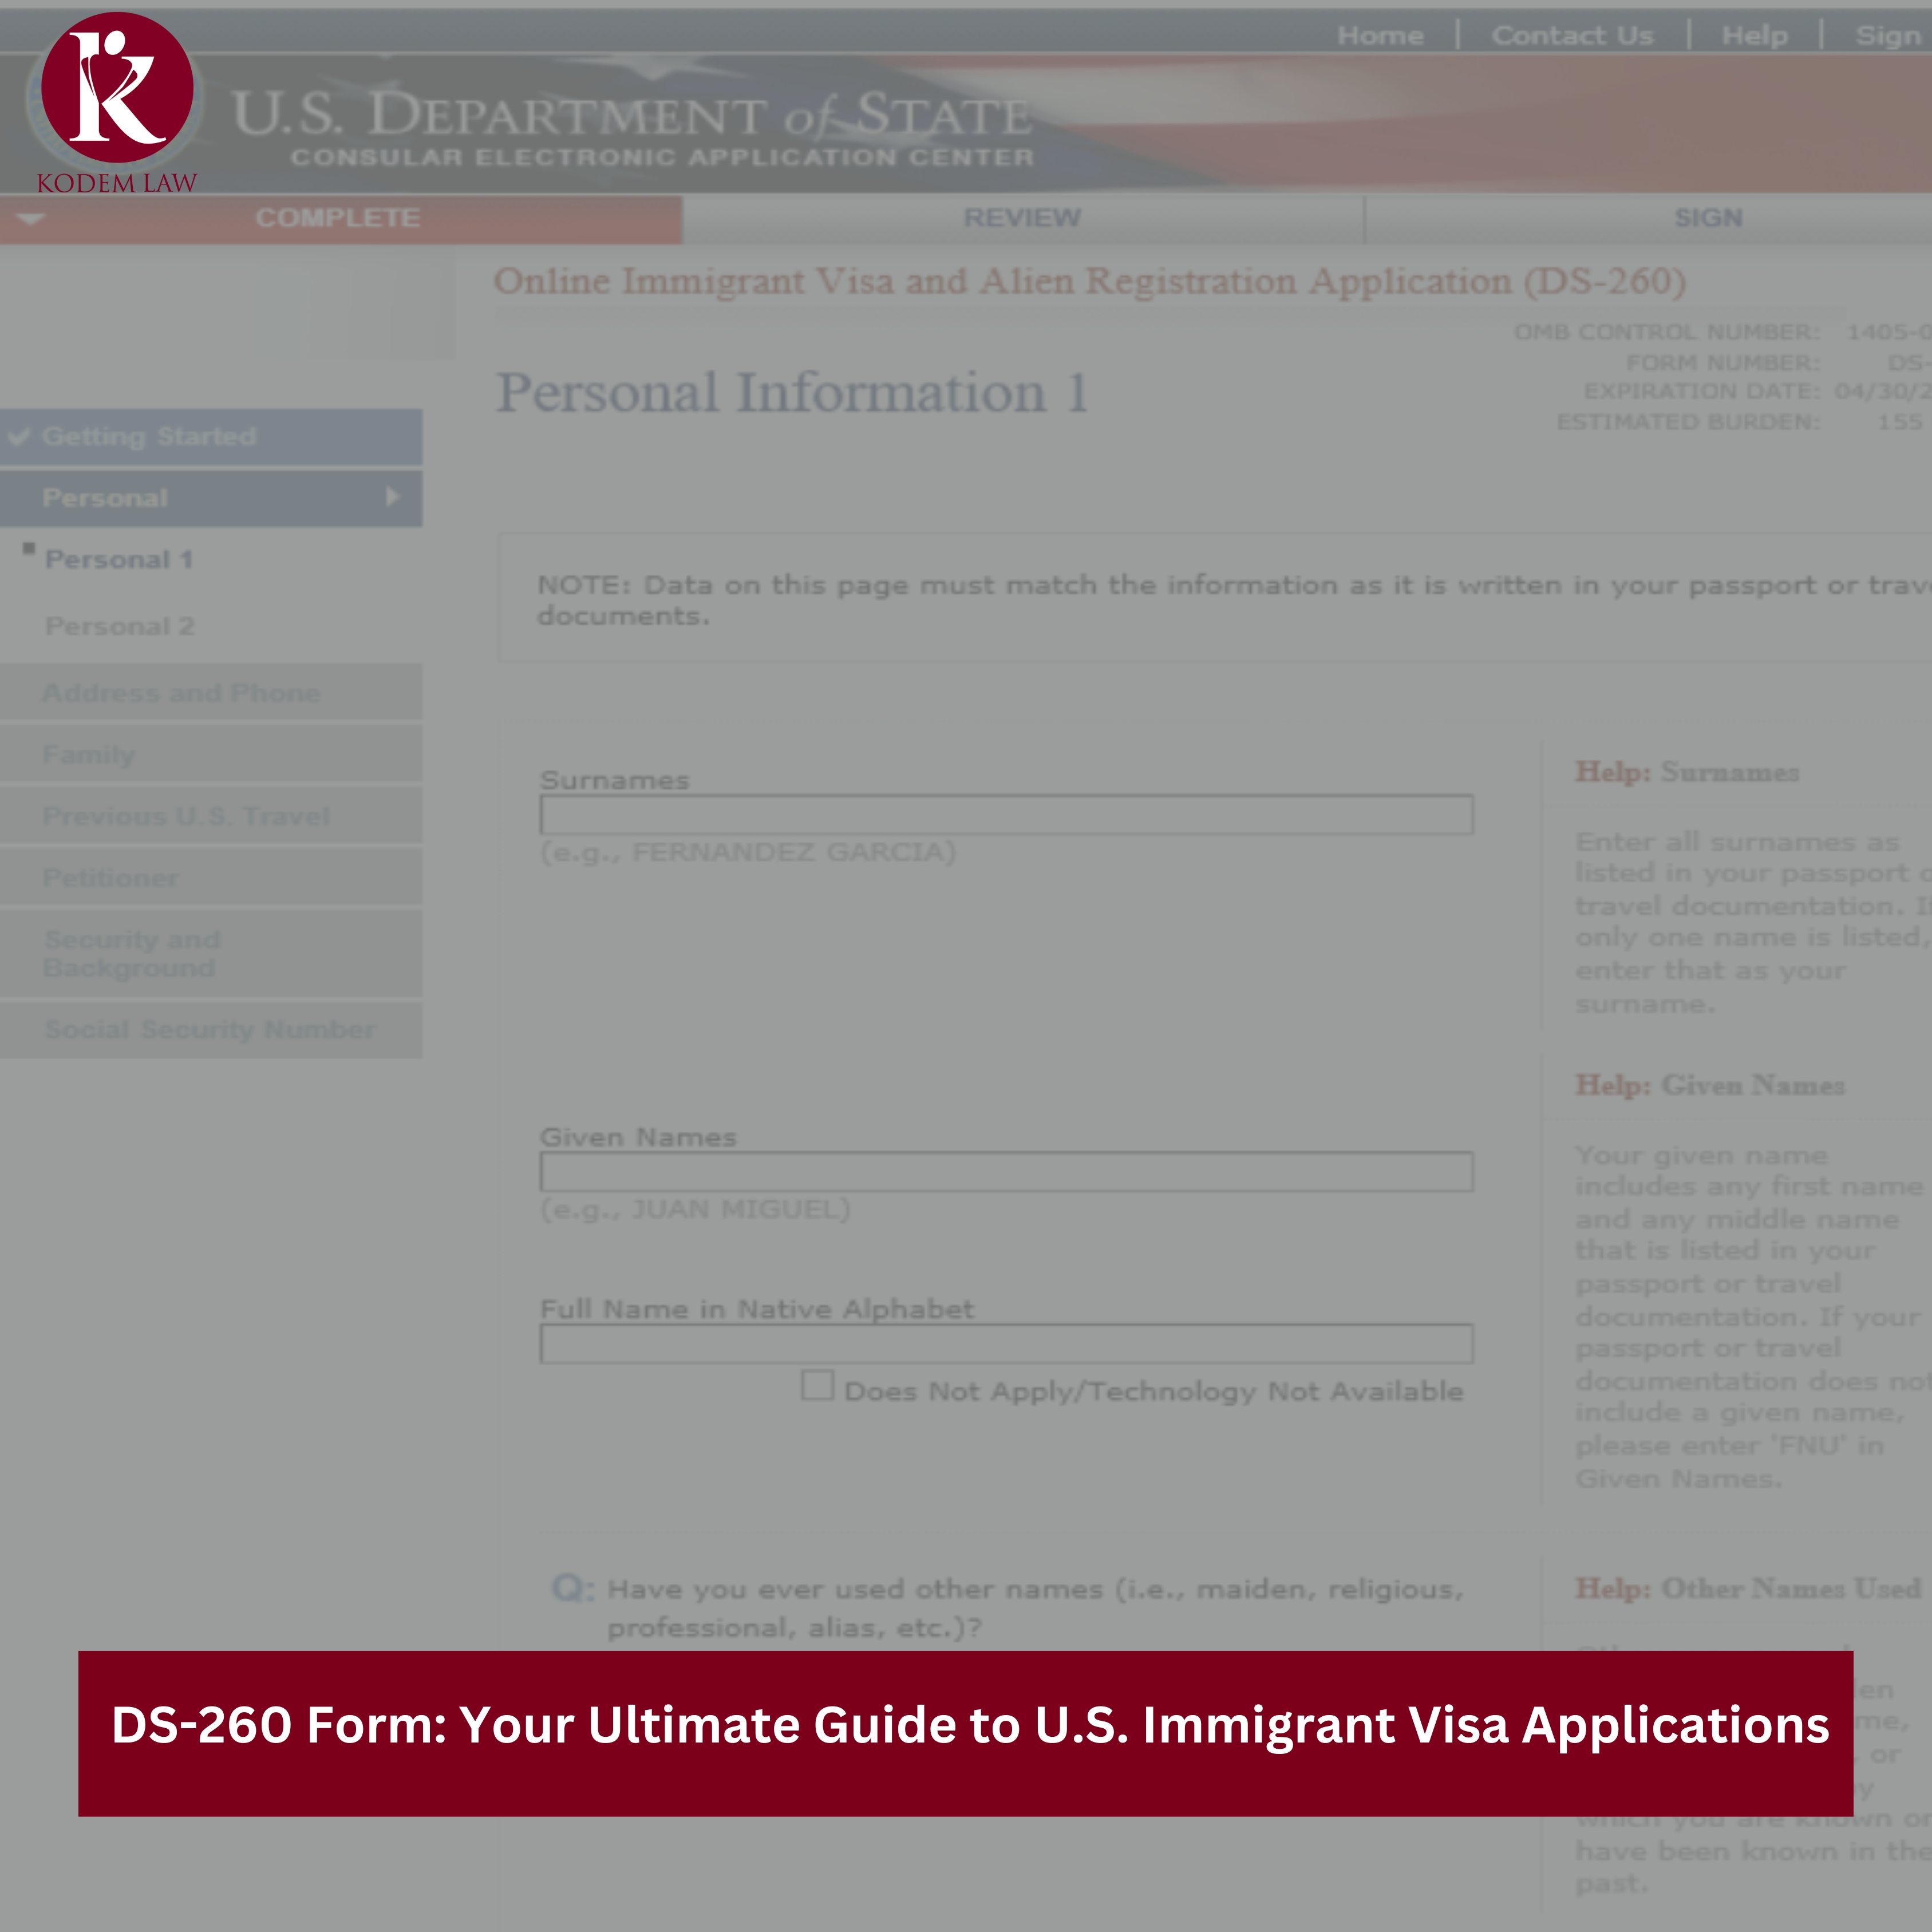 DS-260 Form Your Ultimate Guide to U.S. Immigrant Visa Applications